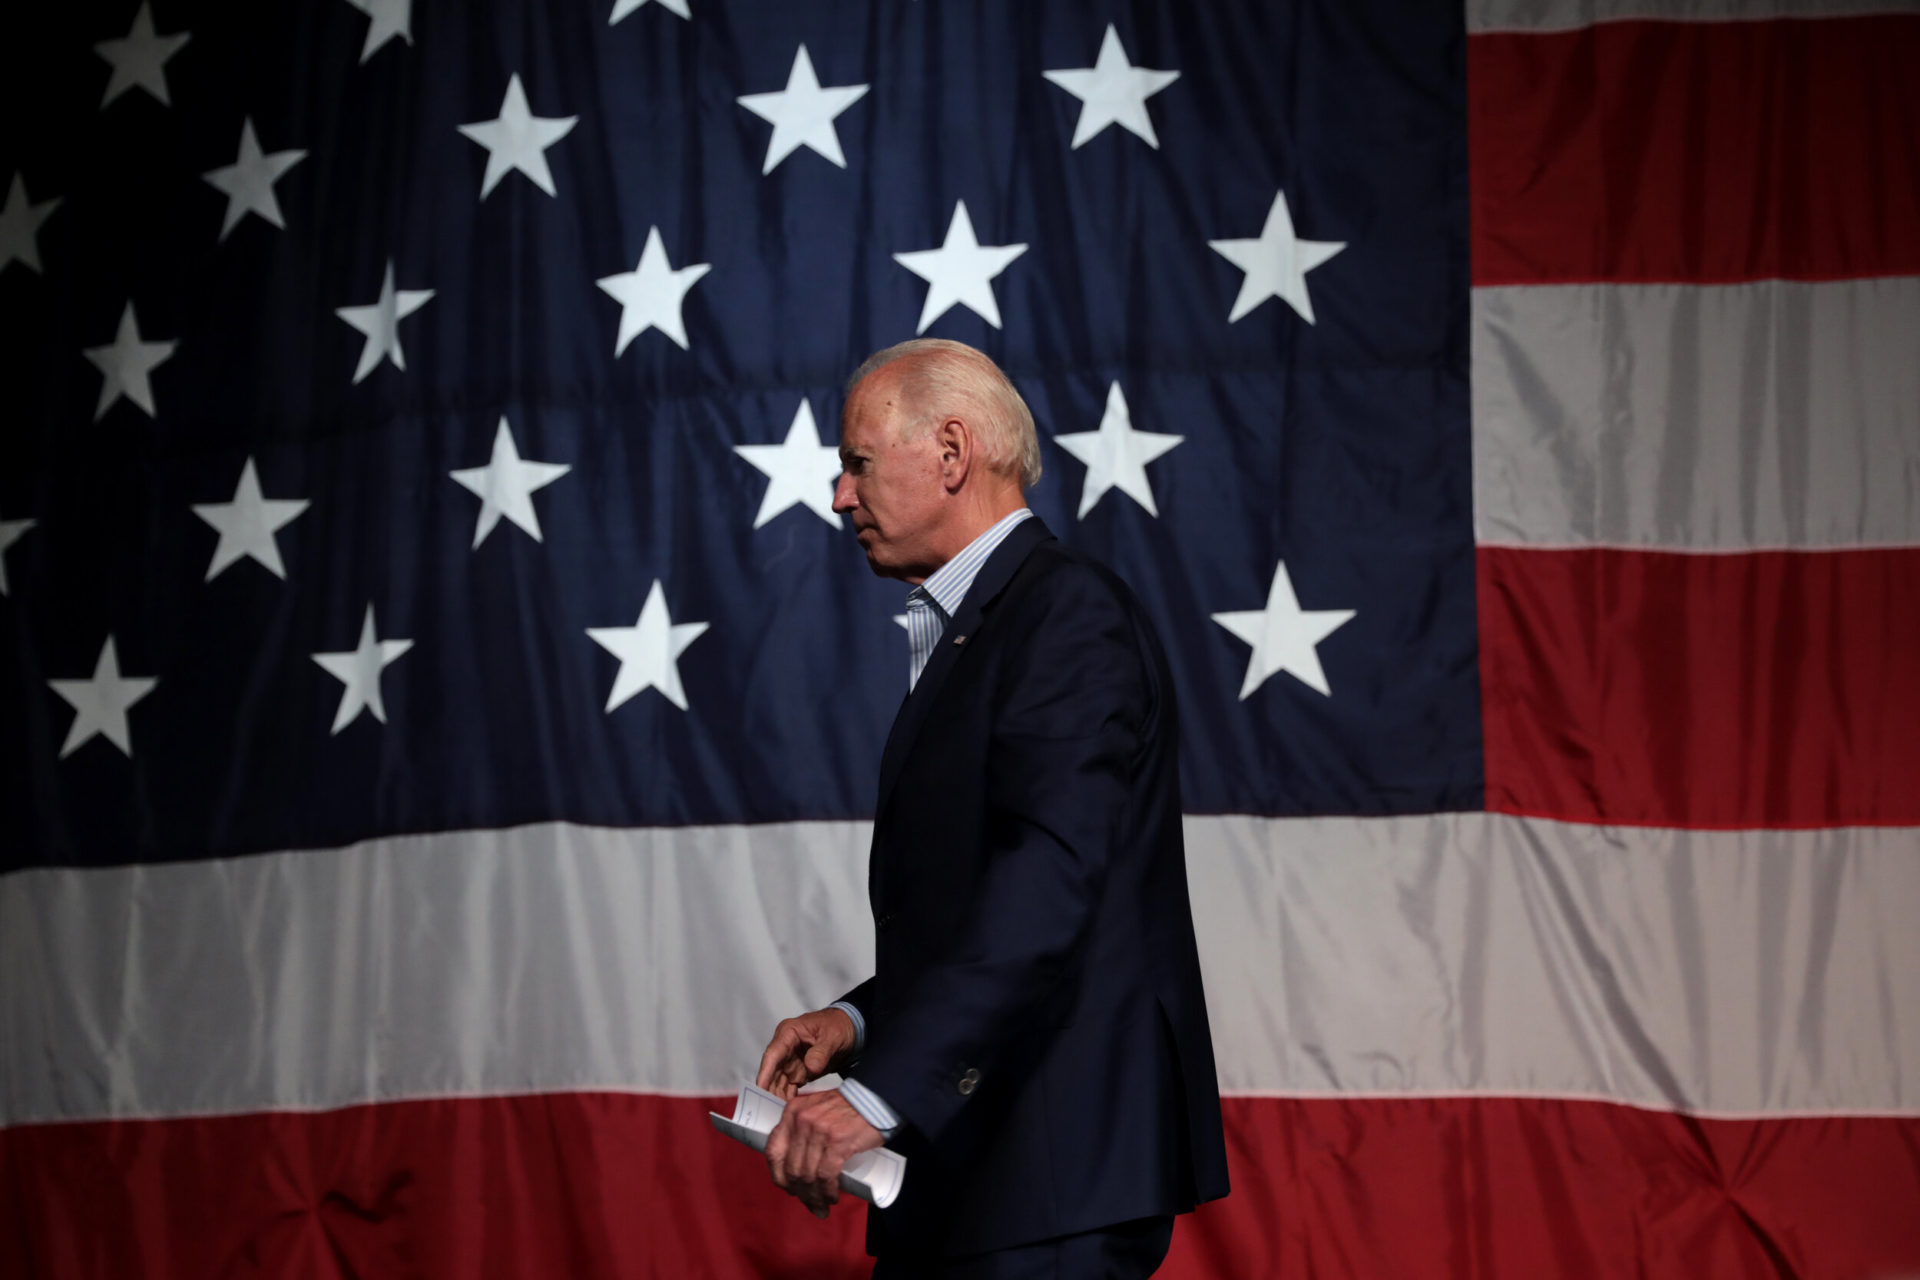 Former Vice President of the United States Joe Biden speaking with attendees at the 2019 Iowa Democratic Wing Ding at Surf Ballroom in Clear Lake, Iowa. (Photo by Gage Skidmore | Flickr)